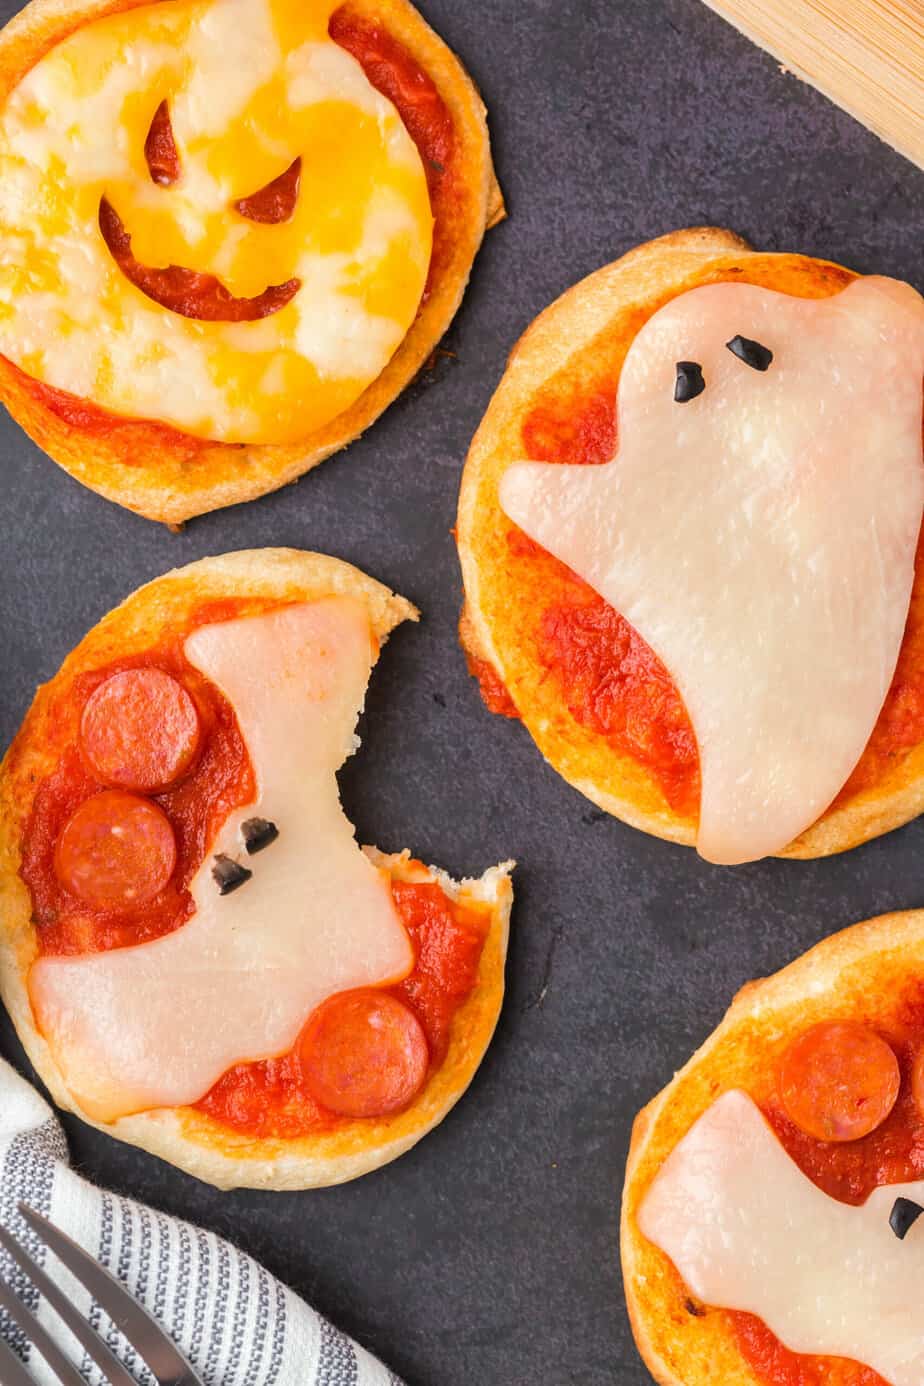 Halloween mini pizzas decorated with cheese shaped like a bat, ghost and jack-o-lantern up close with the bat missing a bite.